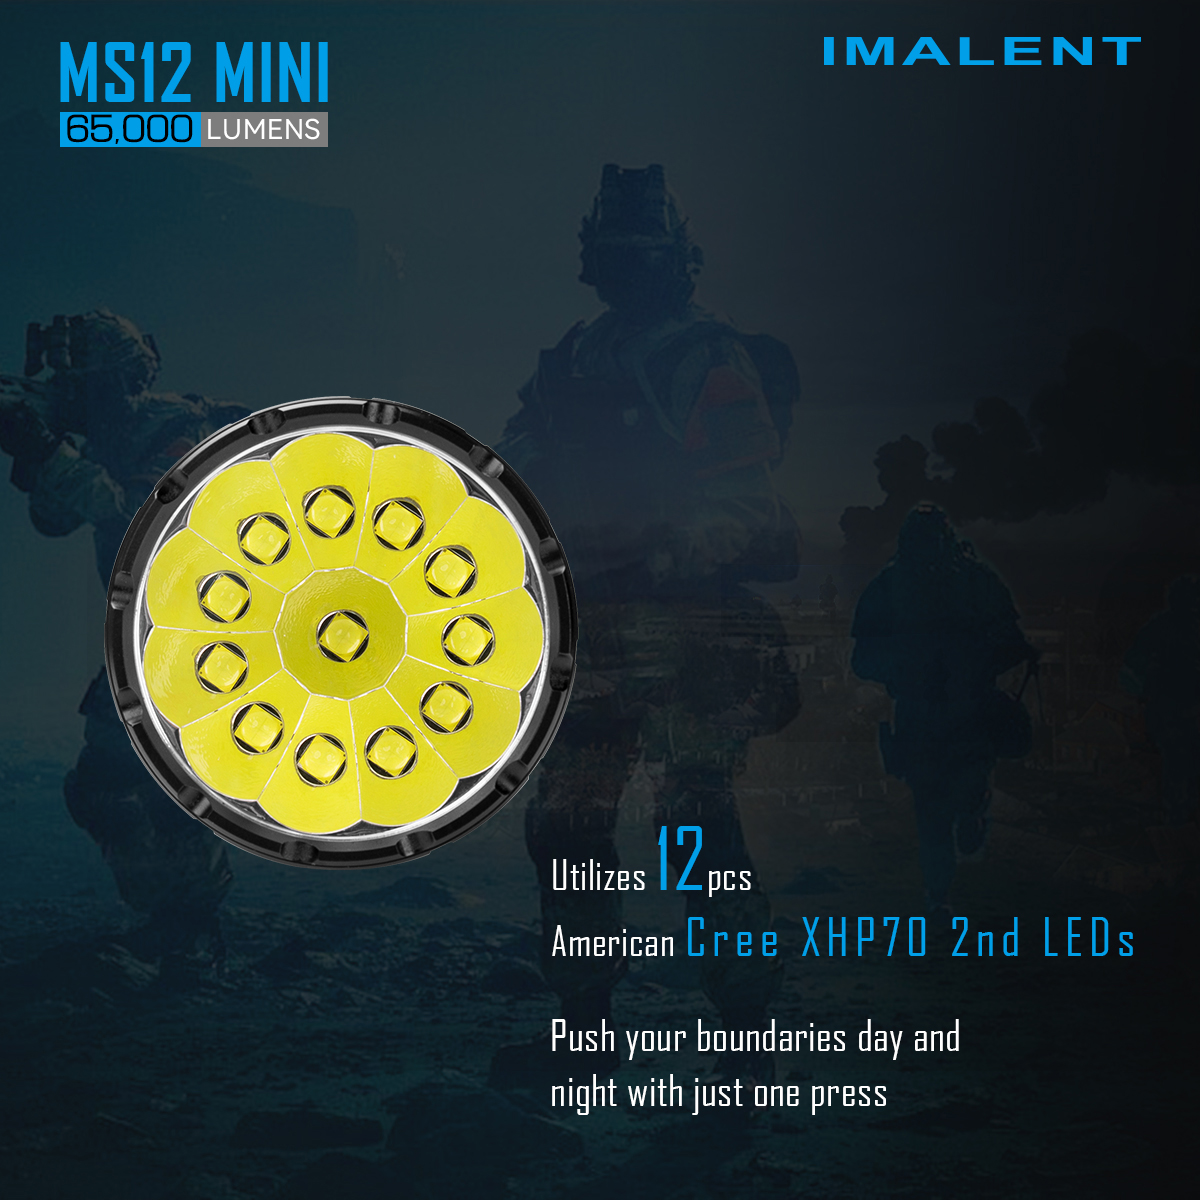 IMALENT-MS12-MINI-65000LM-Flashlight-With-12-Pieces-XHP702-LED-Portable-EDC-IP56-Waterproof-Led-Torc-1940968-3